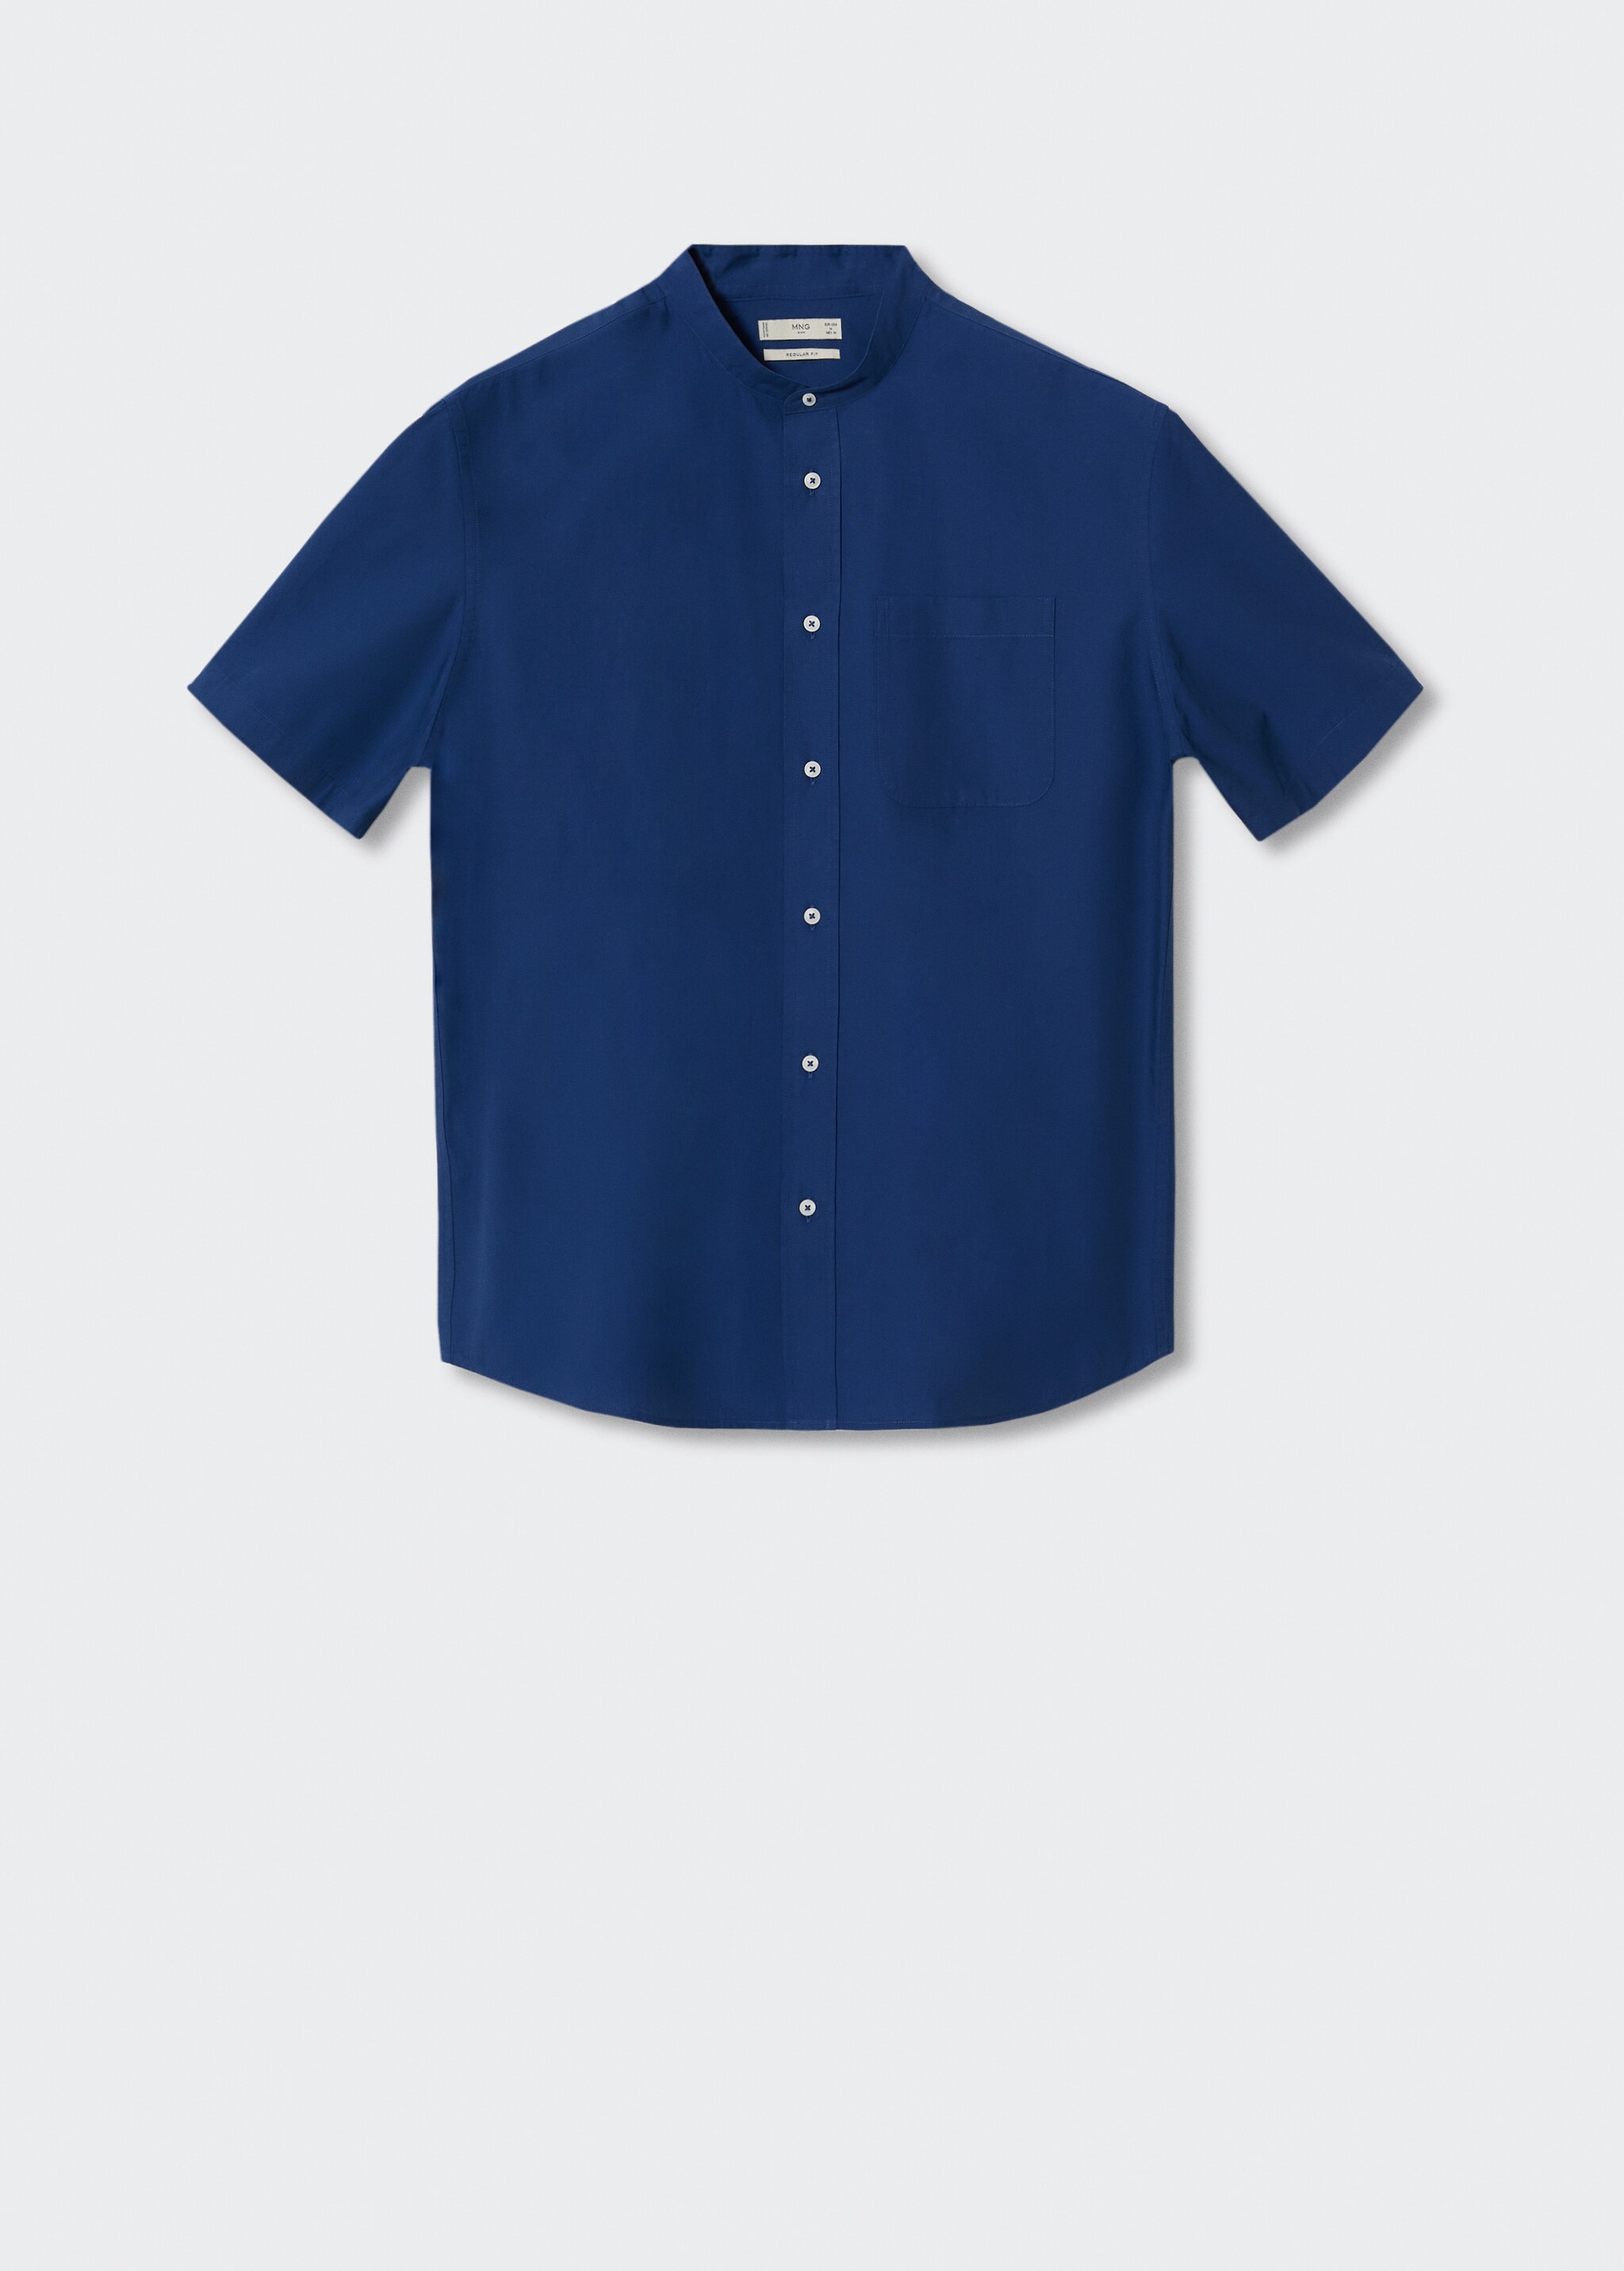 Mao collar cotton shirt - Article without model